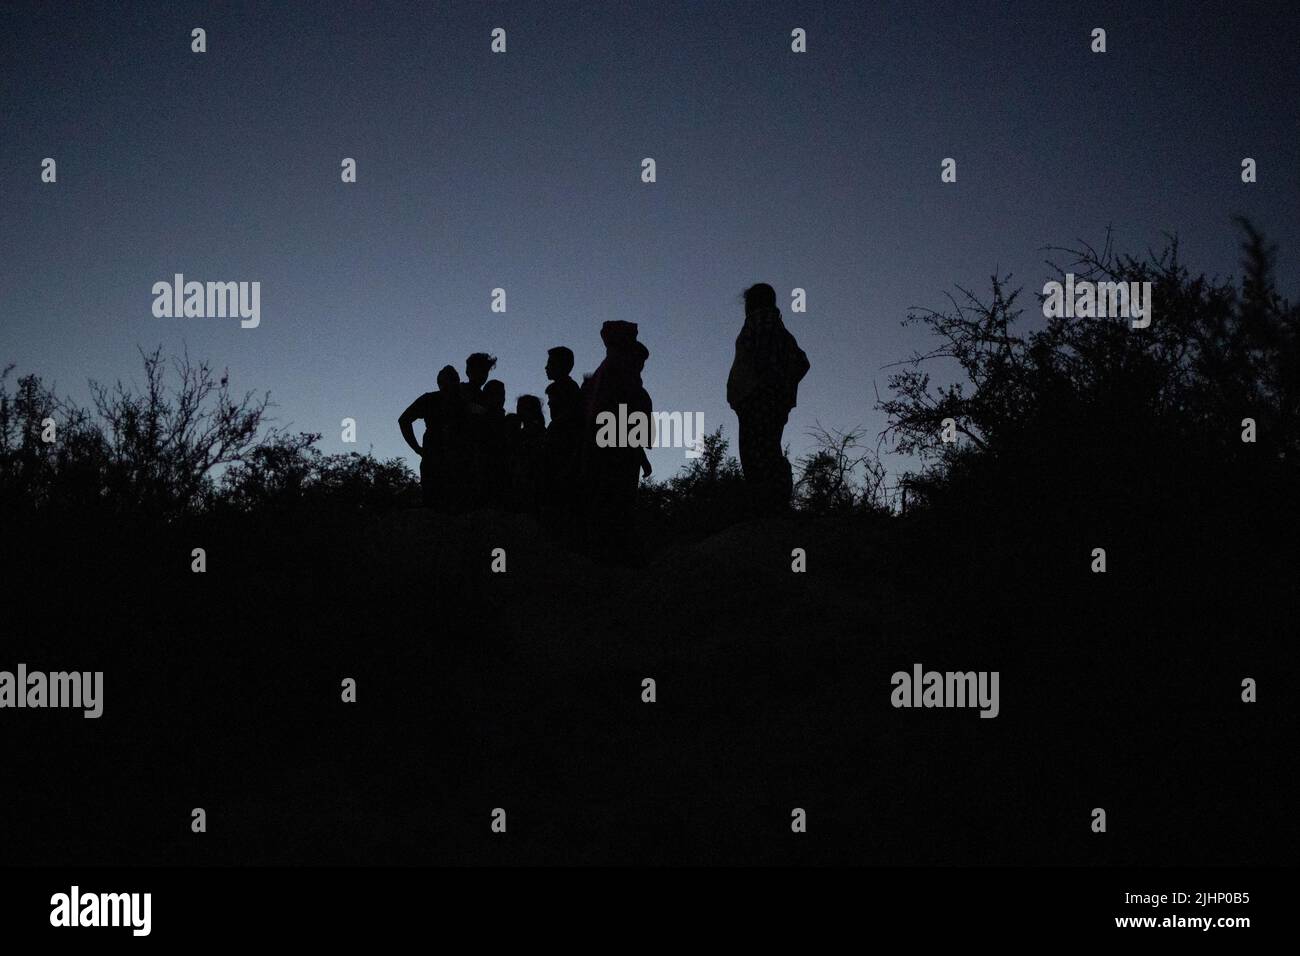 Migrants from Central and South America pause to find their way after crossing the Rio Grande river into the United States from Mexico in Roma, Texas, U.S., July 18, 2022. REUTERS/Adrees Latif Stock Photo